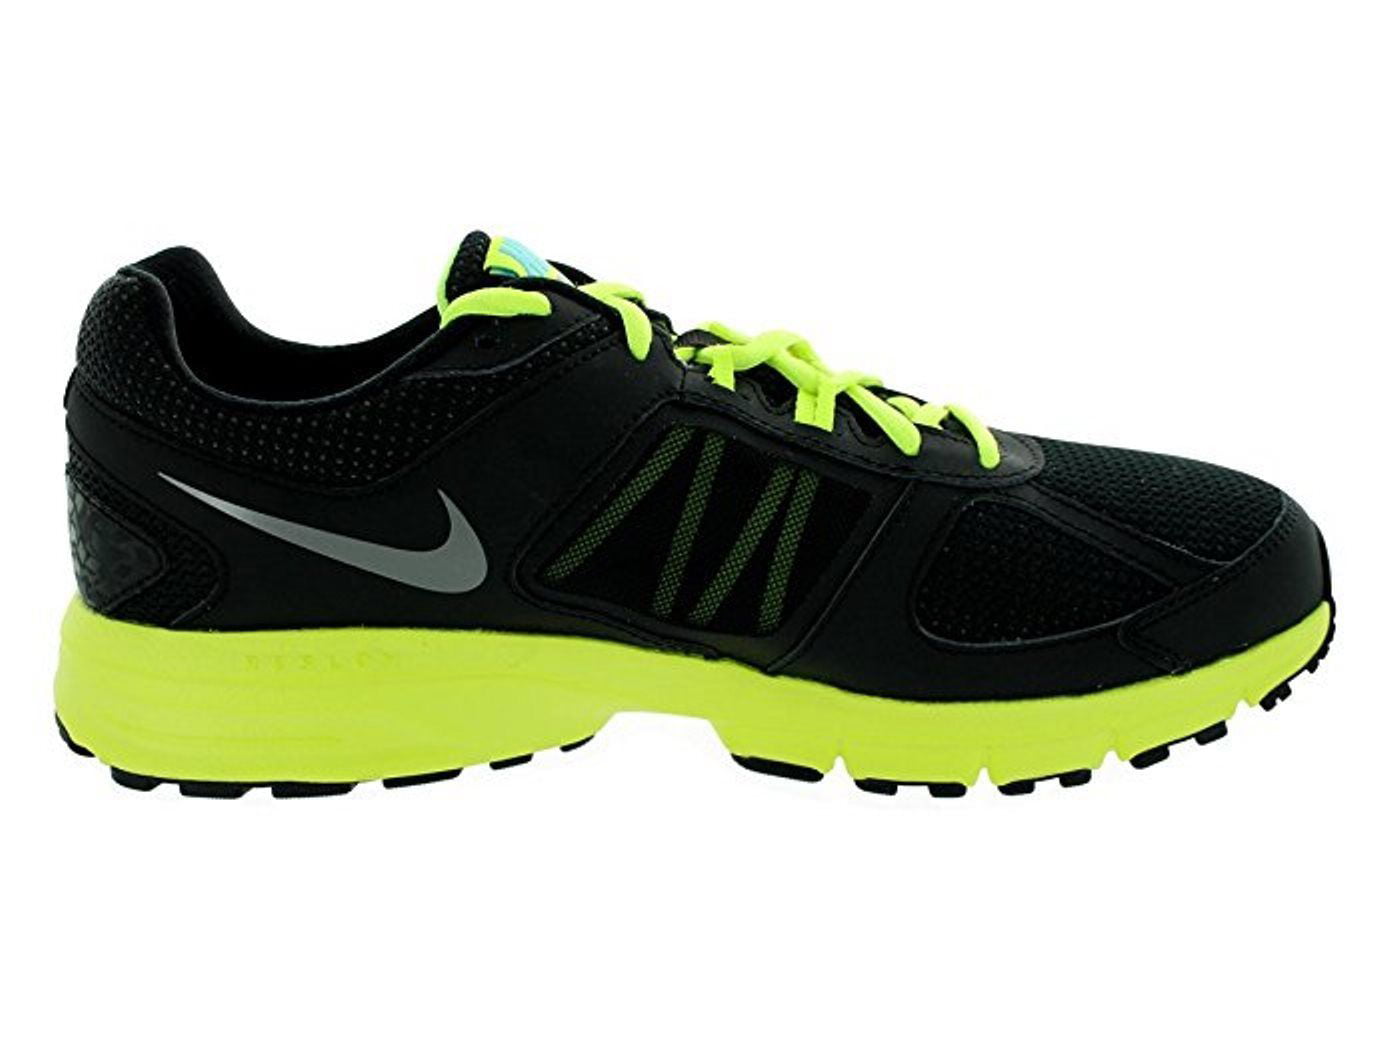 Buy Nike Mens Air 3 Running Shoes 16271-003 BlackMtlcGreyVlt $100.00 Mens Size 10 DM US Online at Lowest Price in Ubuy Hungary. 565978883